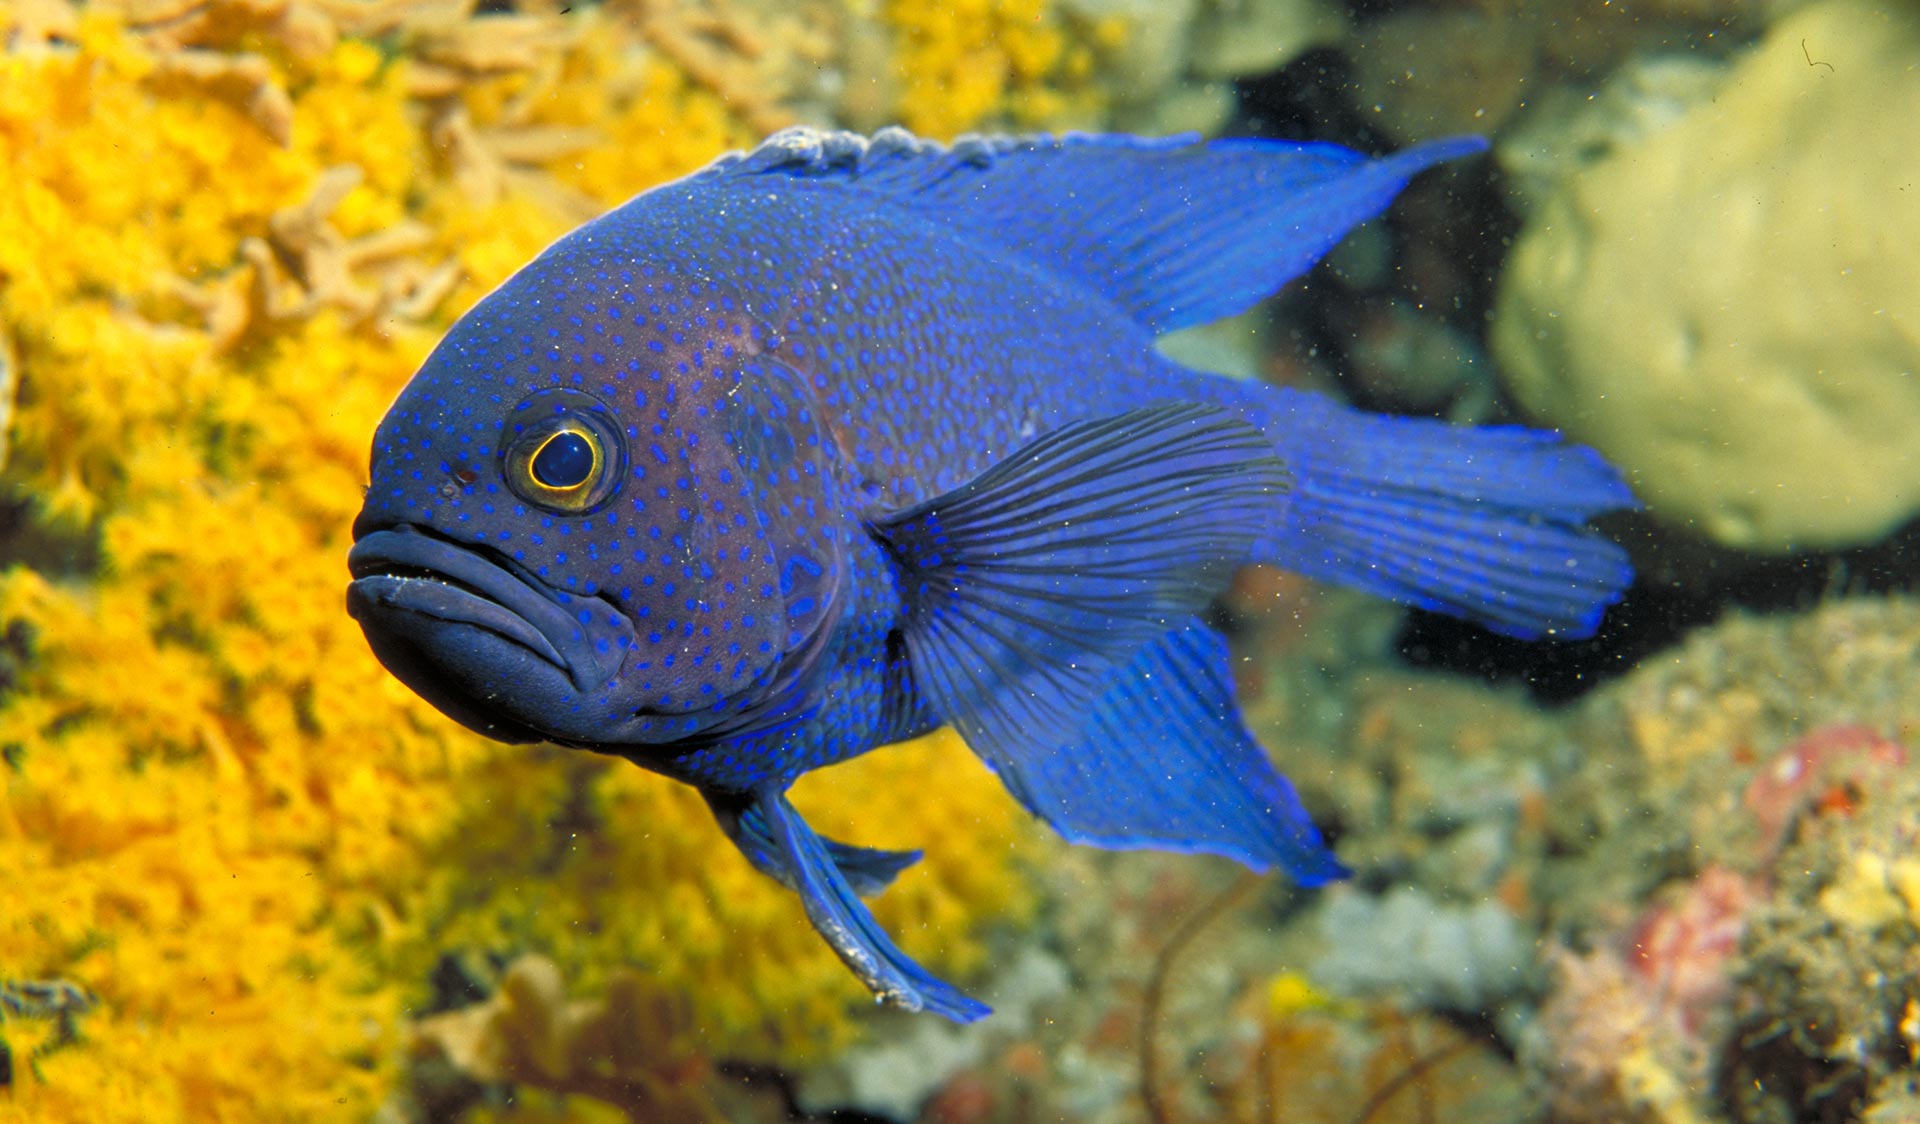 A blue devil fish pictured in front of some yellow coral.